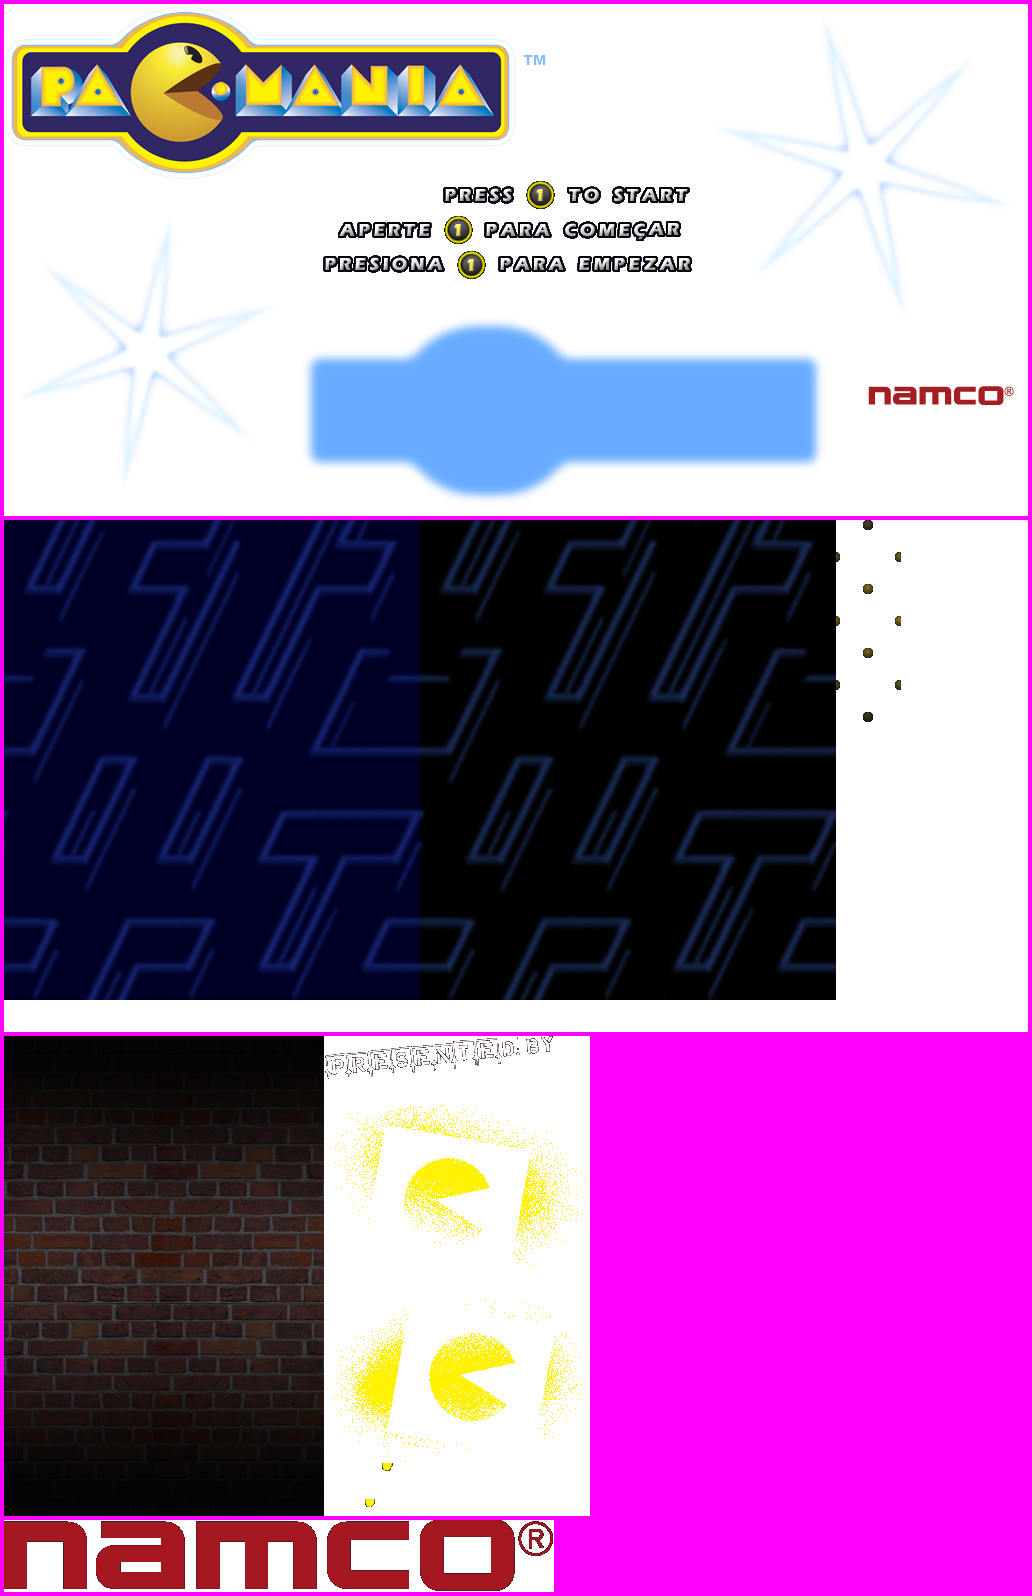 Pac-Mania - Introduction, Company Logos & Title Screen